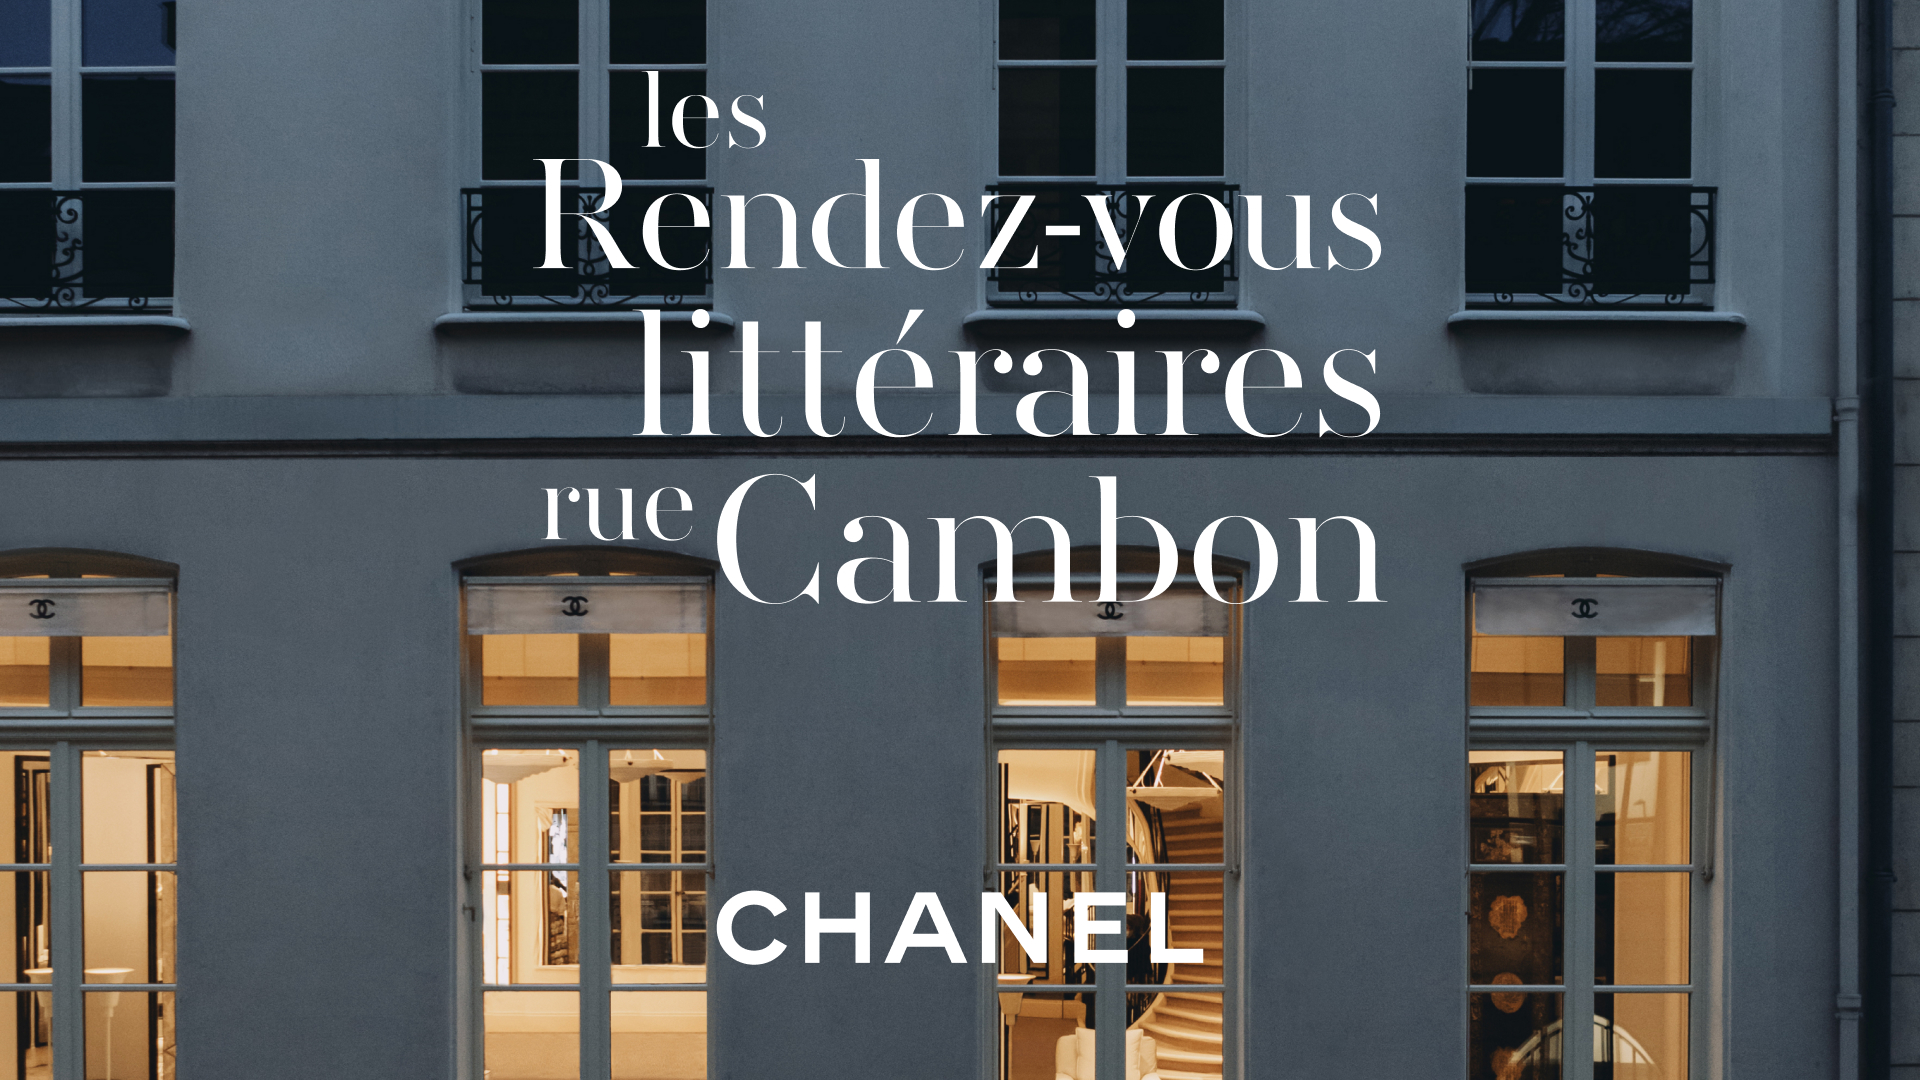 CHANEL on X: Through 'Les Rendez-vous littéraires rue Cambon' [Literary  Rendezvous at Rue Cambon], CHANEL welcomes female writers to share their  unique perspective on their own work or literary figures who have